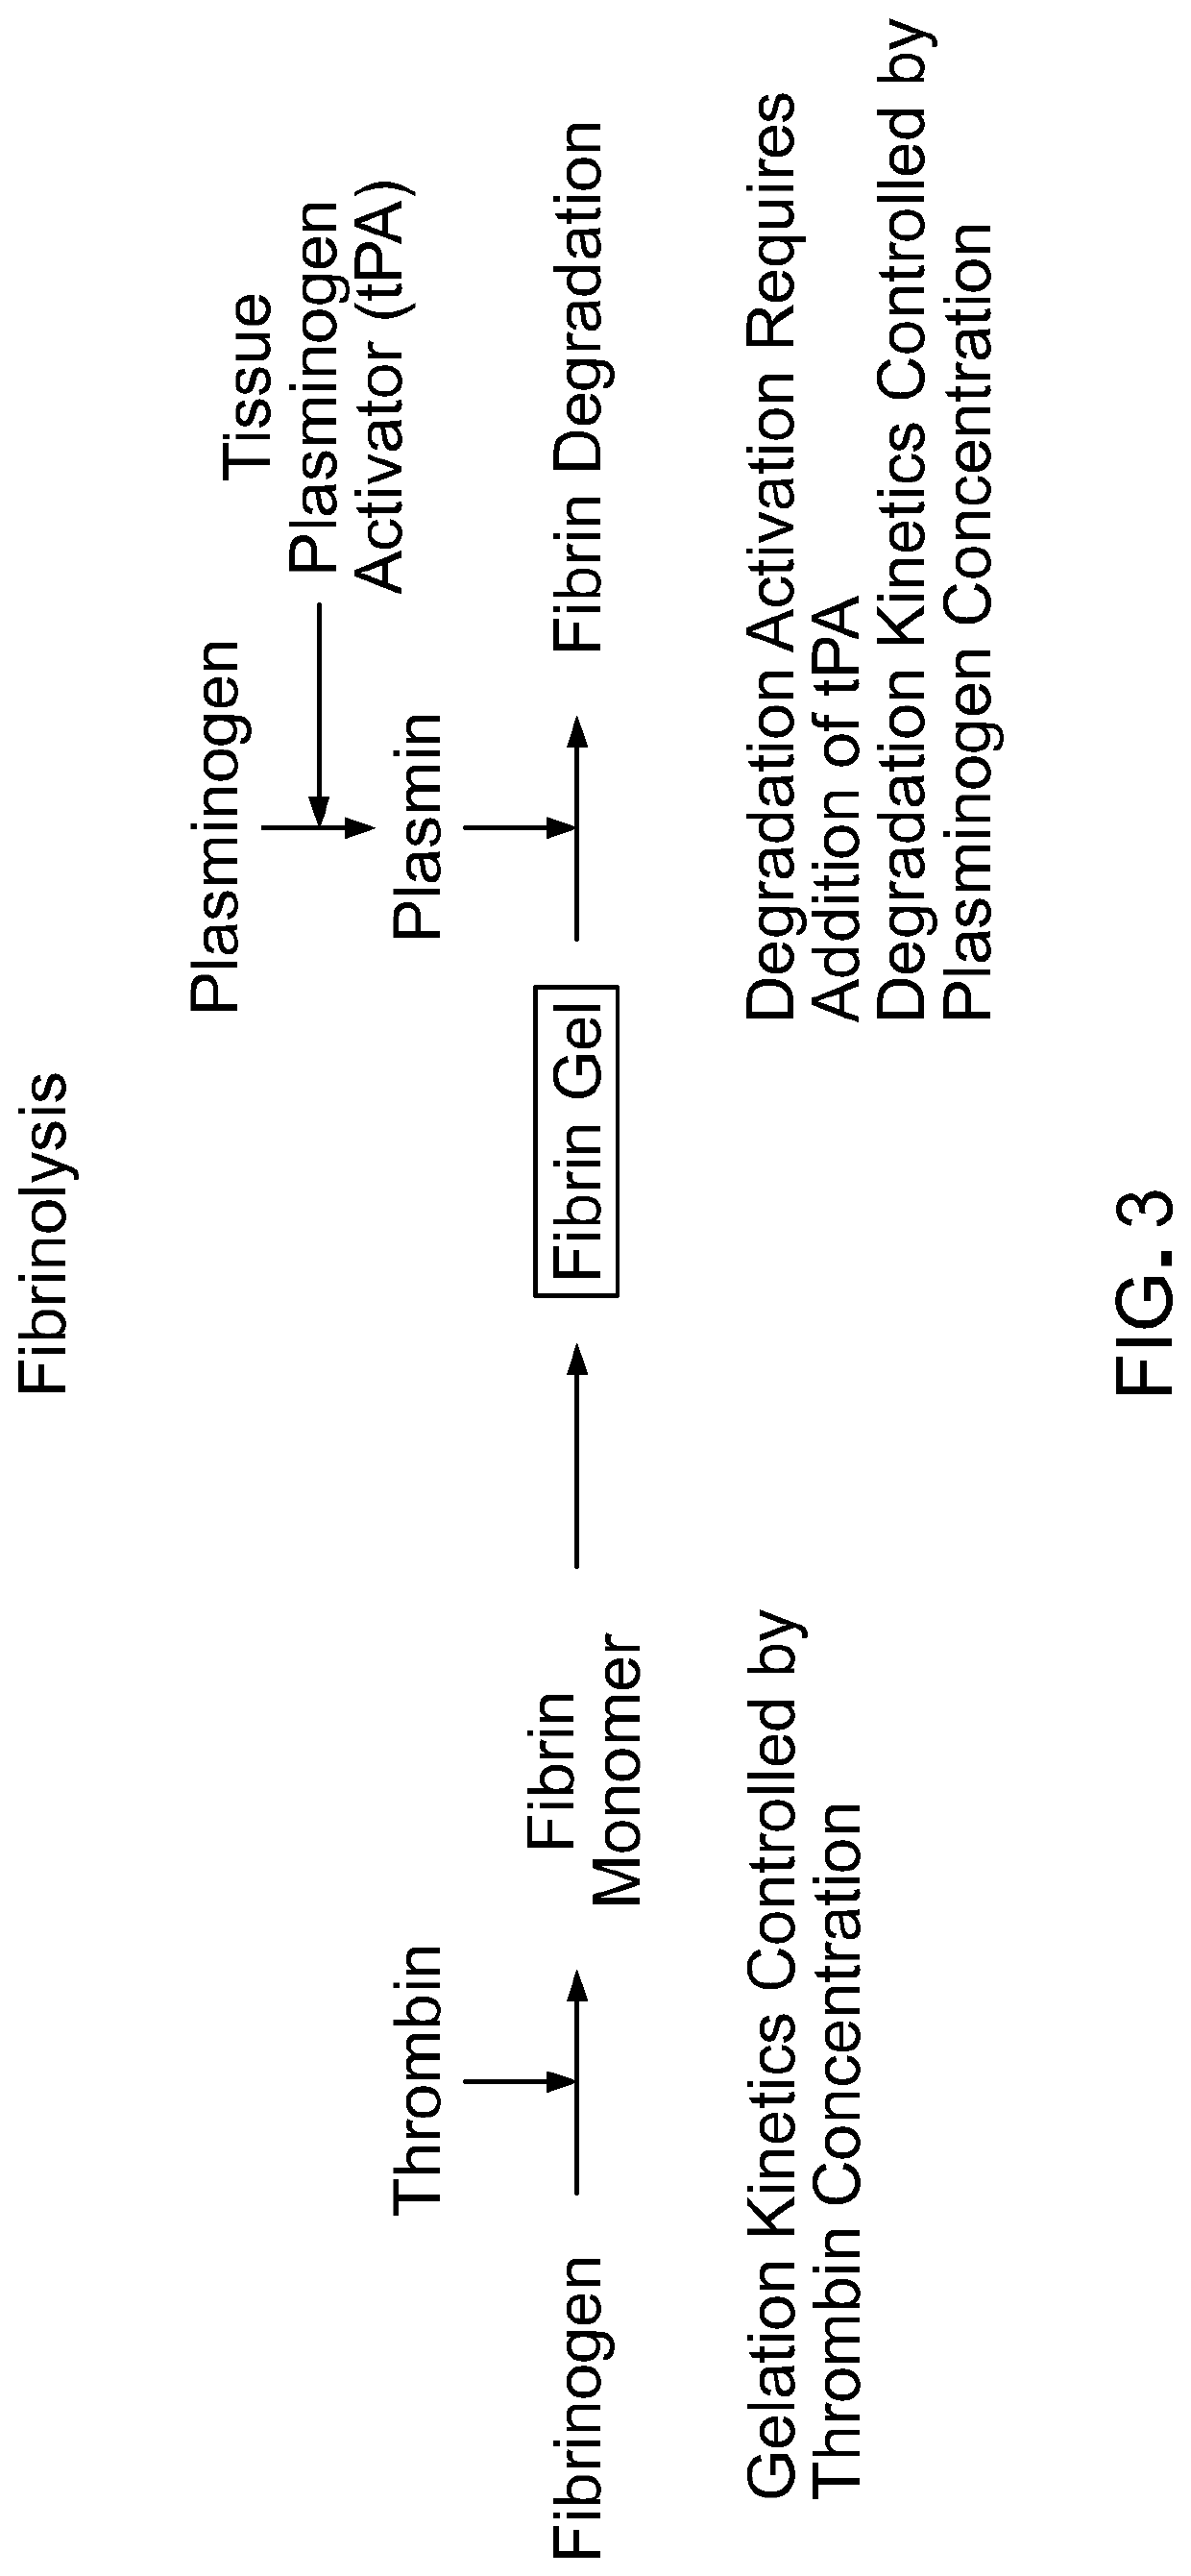 Methods and materials for using fibrin supports for retinal pigment epithelium transplantation